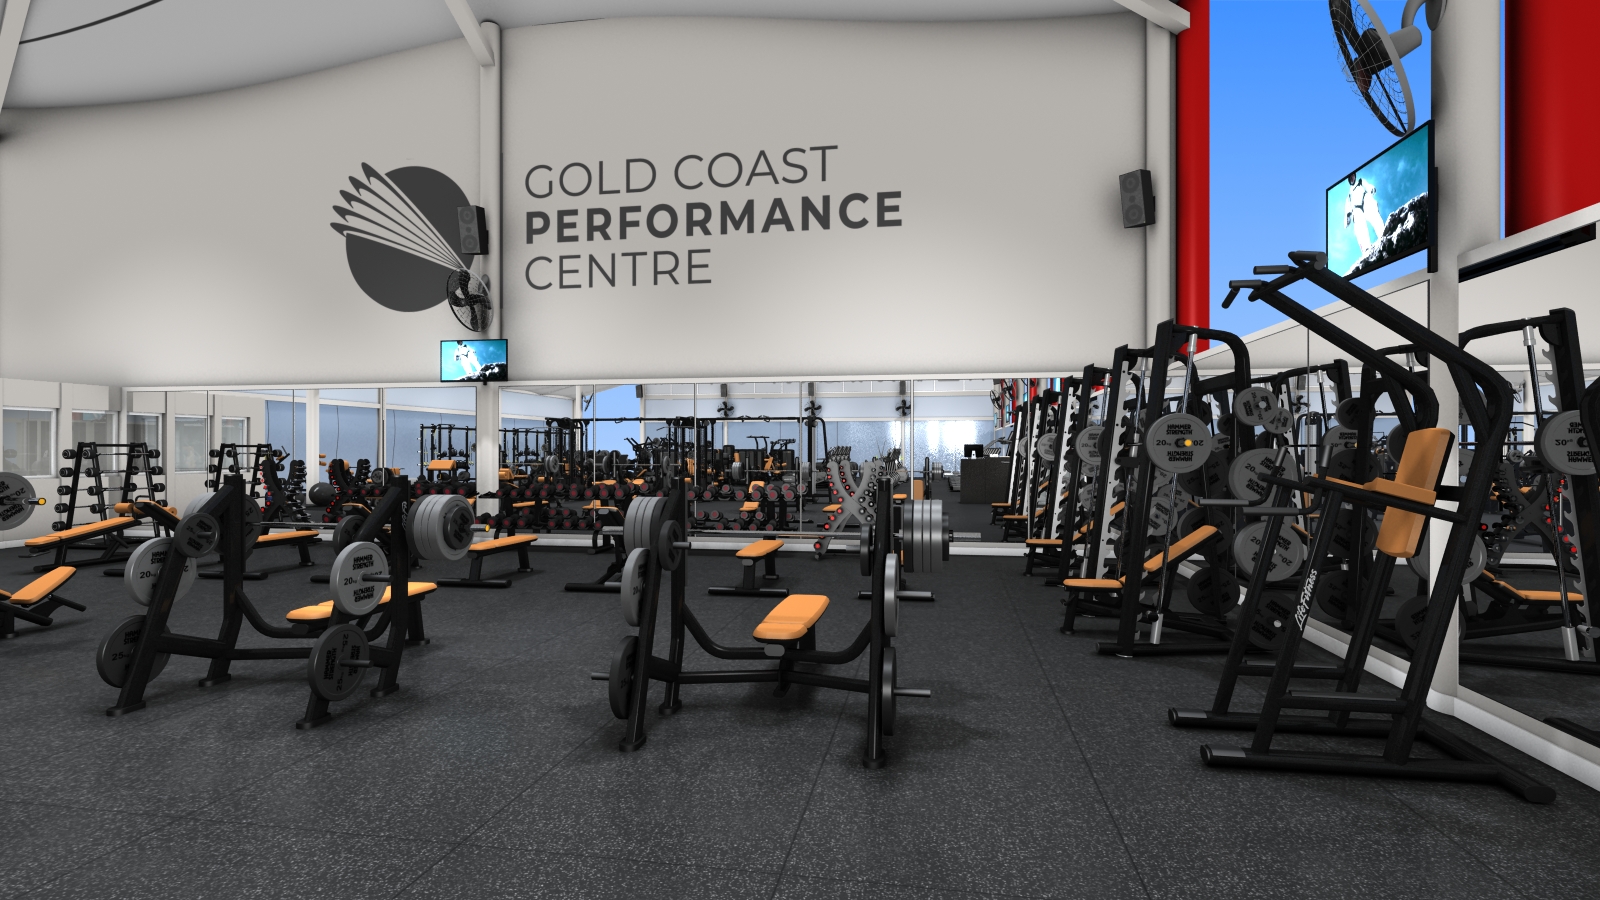 Media Release: Gold Coast Performance Centre Opens New Gym After Refurbishment